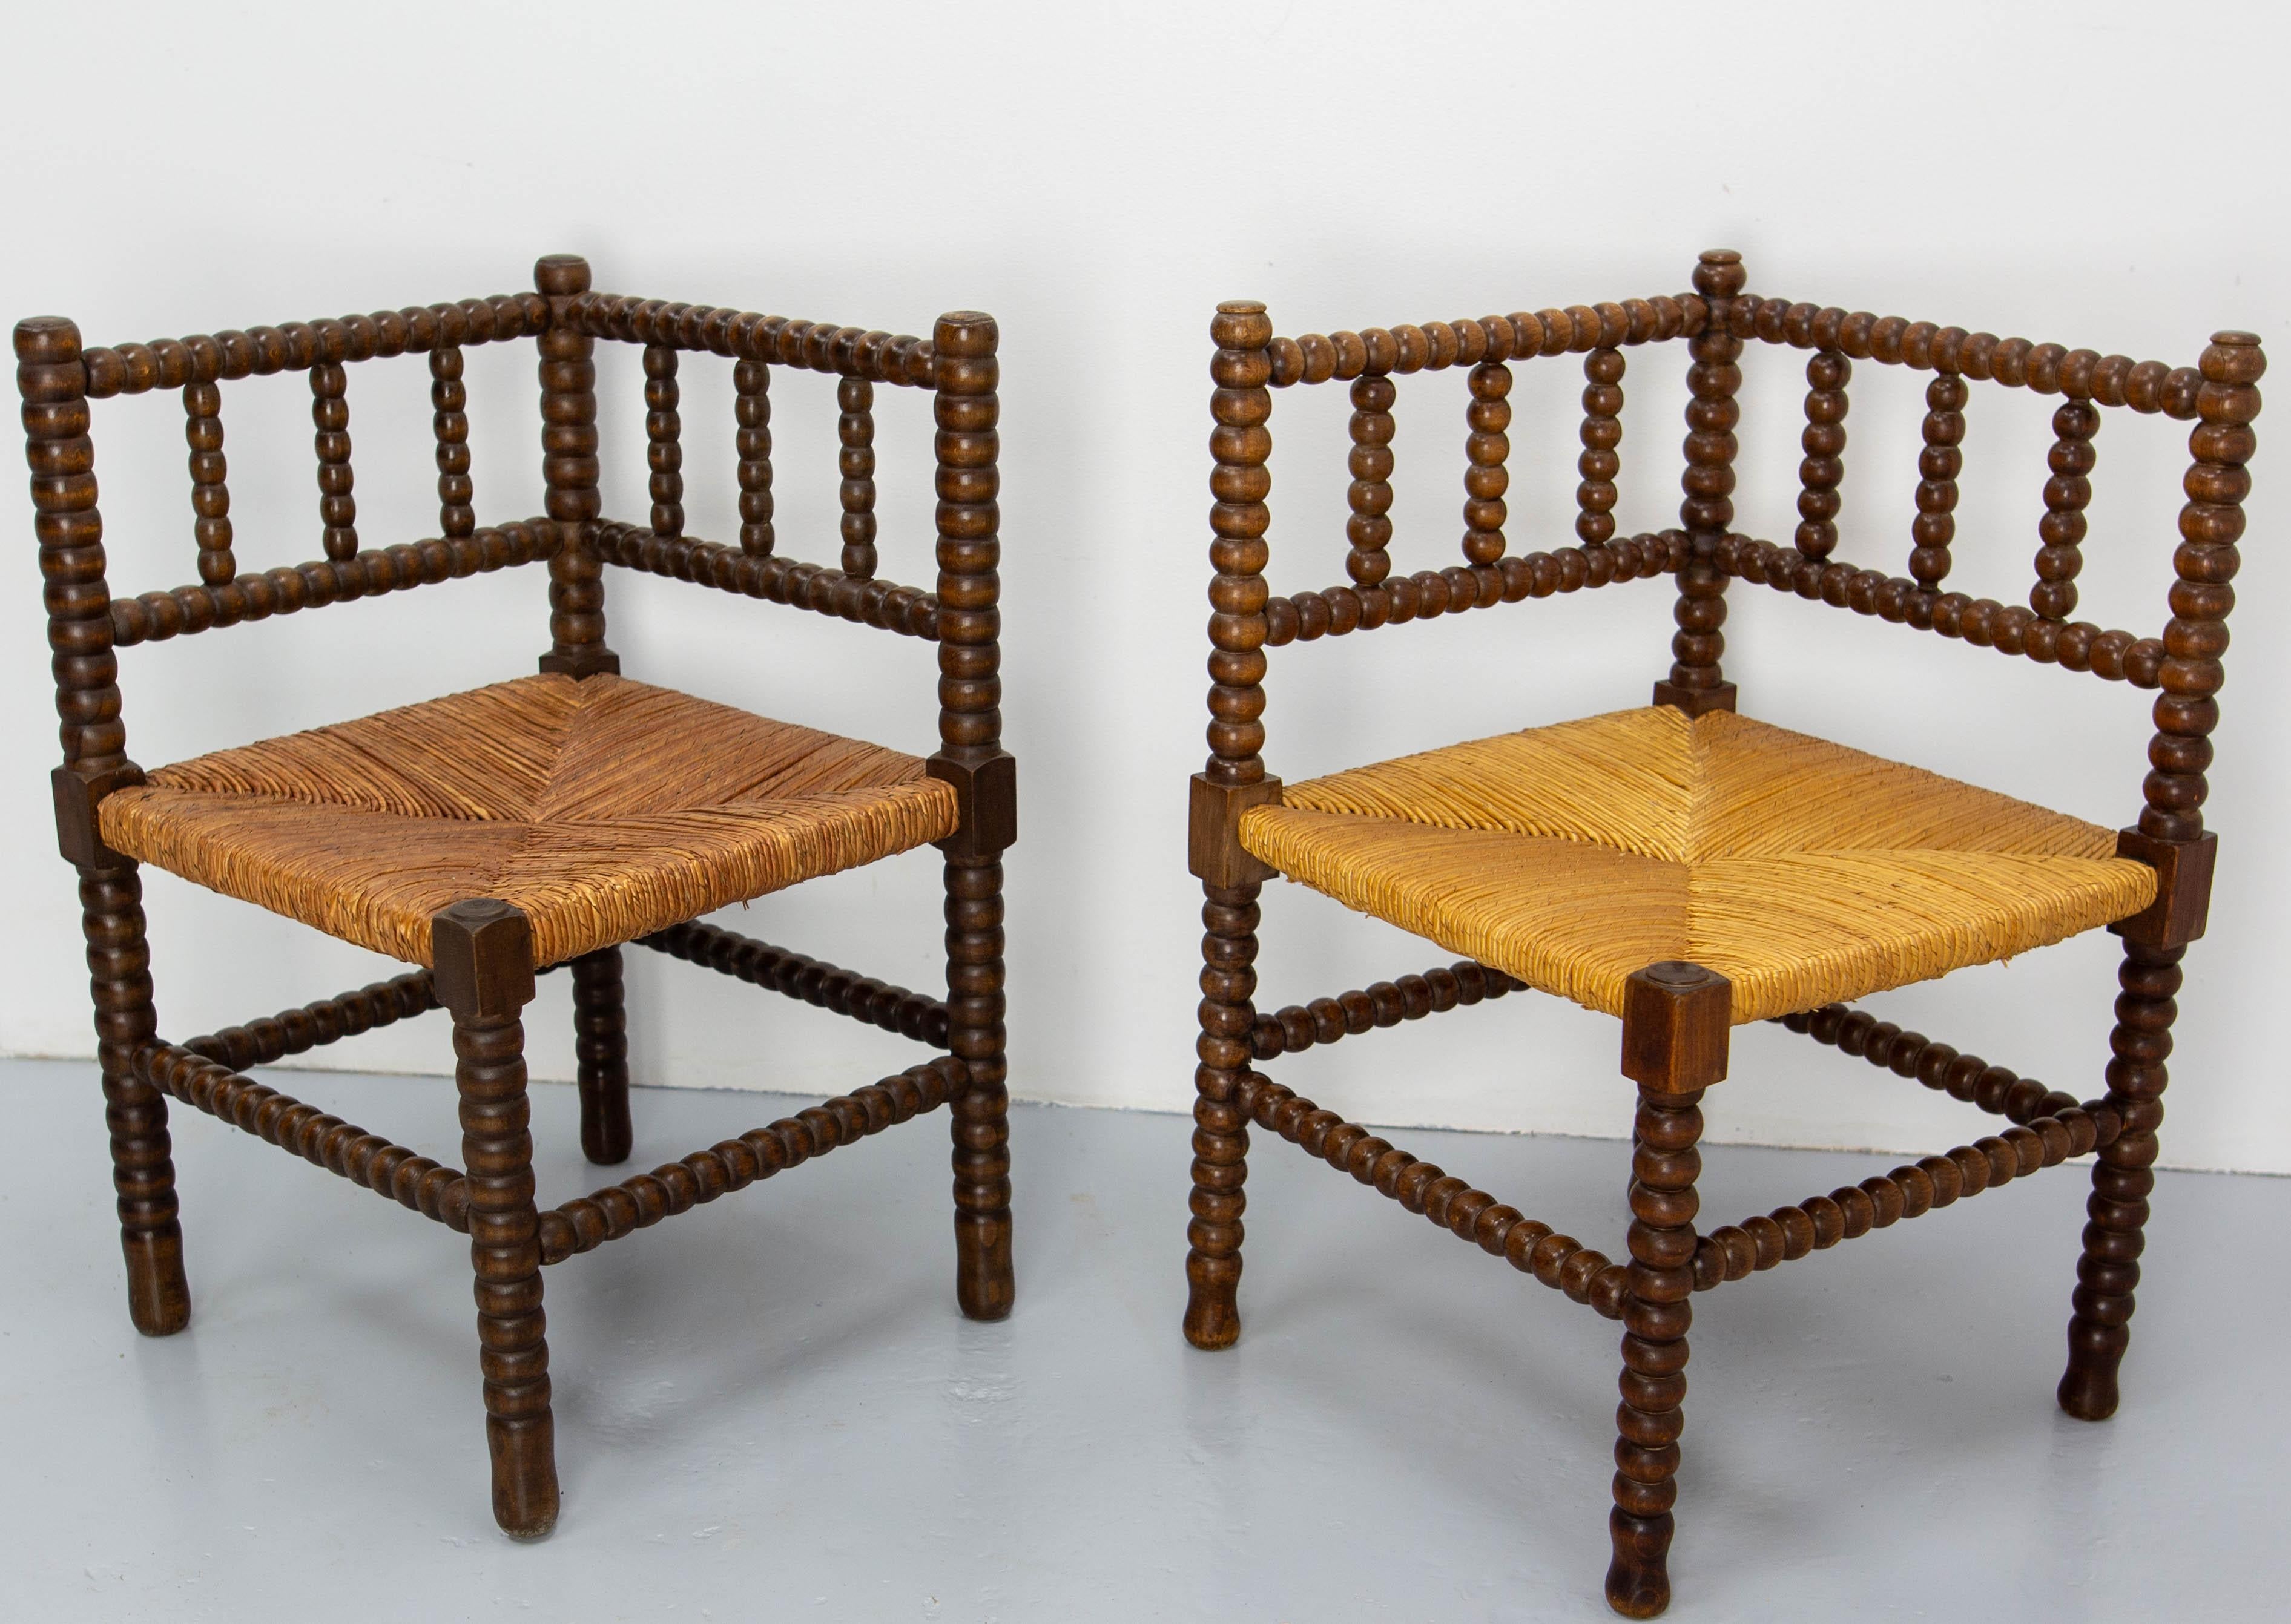 French strawed and turned pair of chairs, made circa 1940
False pair from a different source but allowing them to be placed in a room like side chairs. This explain the difference in the straw colors and also the slight differences in the shaping of